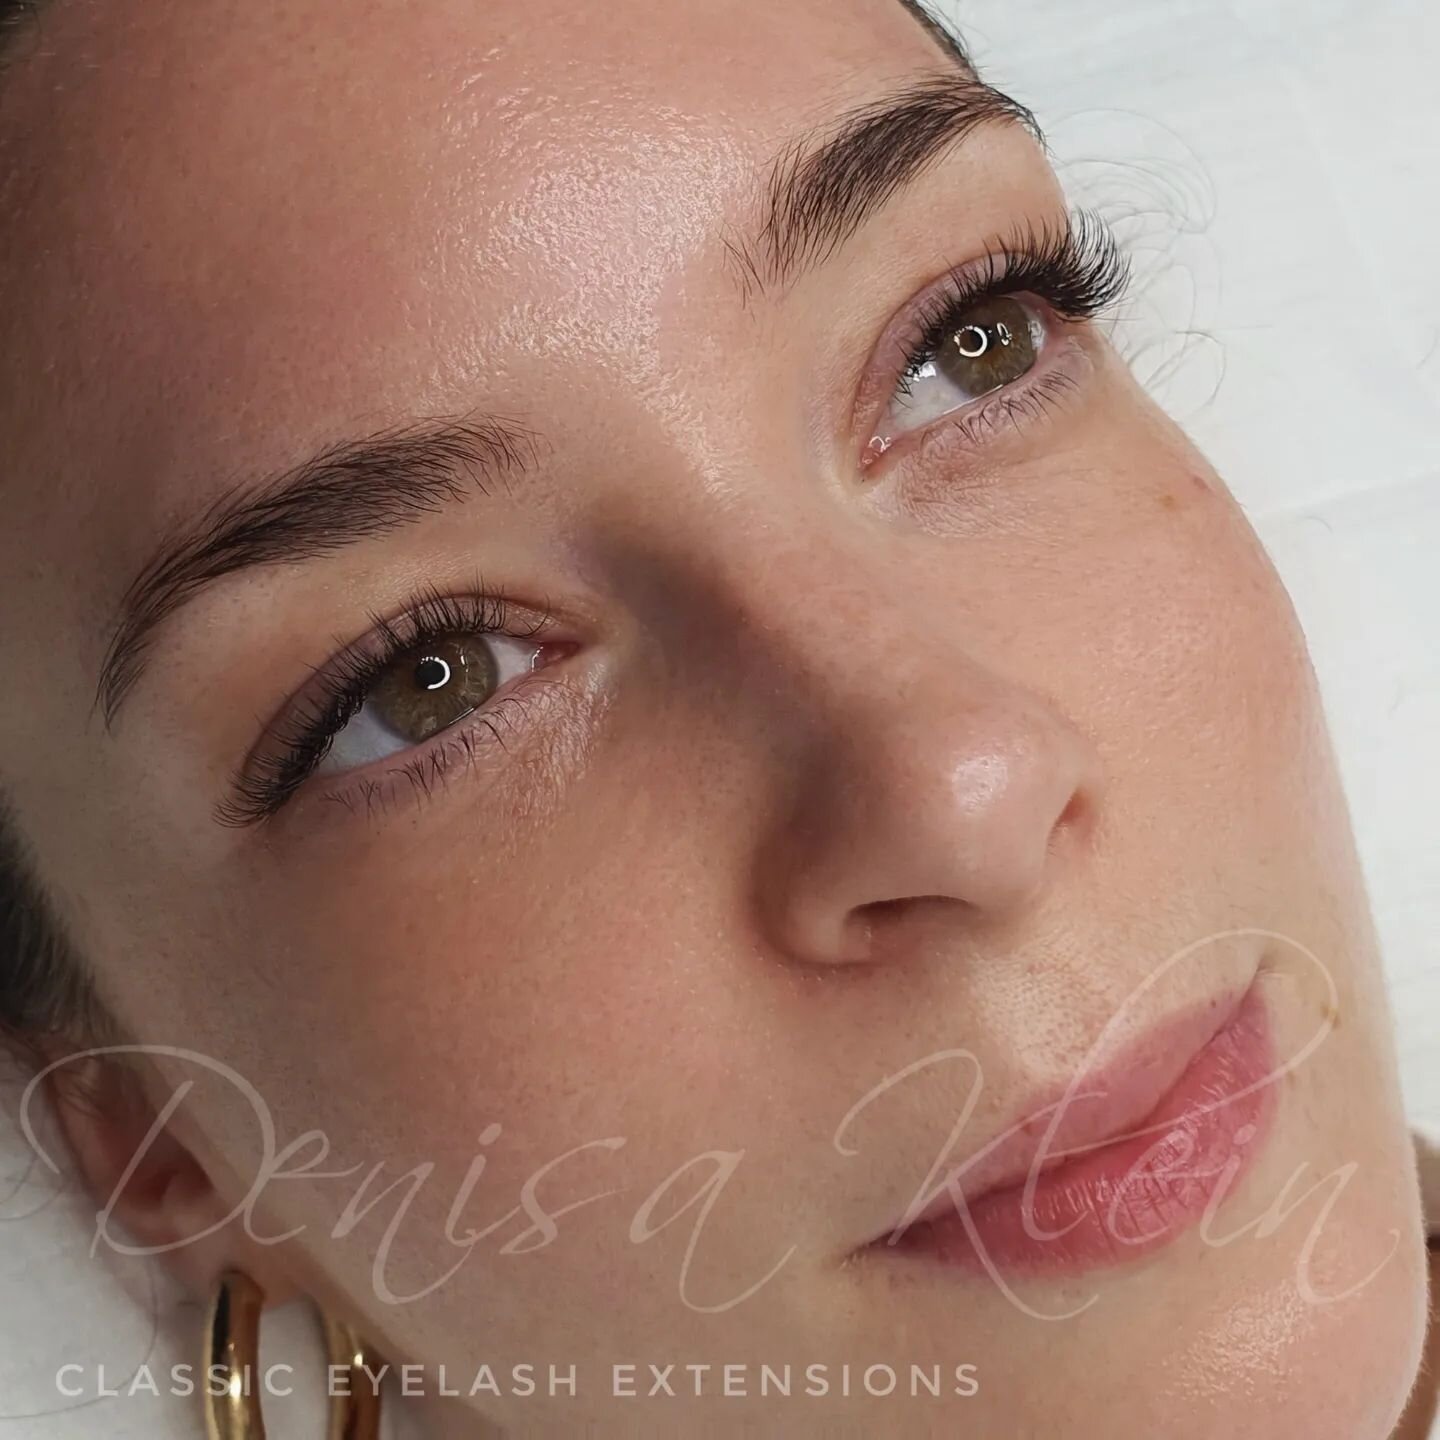 Classic&nbsp;eyelash extensions 

Classic lashing is a technique in which a single&nbsp;extension&nbsp;is applied to one, isolated natural&nbsp;lash.&nbsp;Classic lashes&nbsp;are perfect for adding length and some fullness to your natural&nbsp;lash l